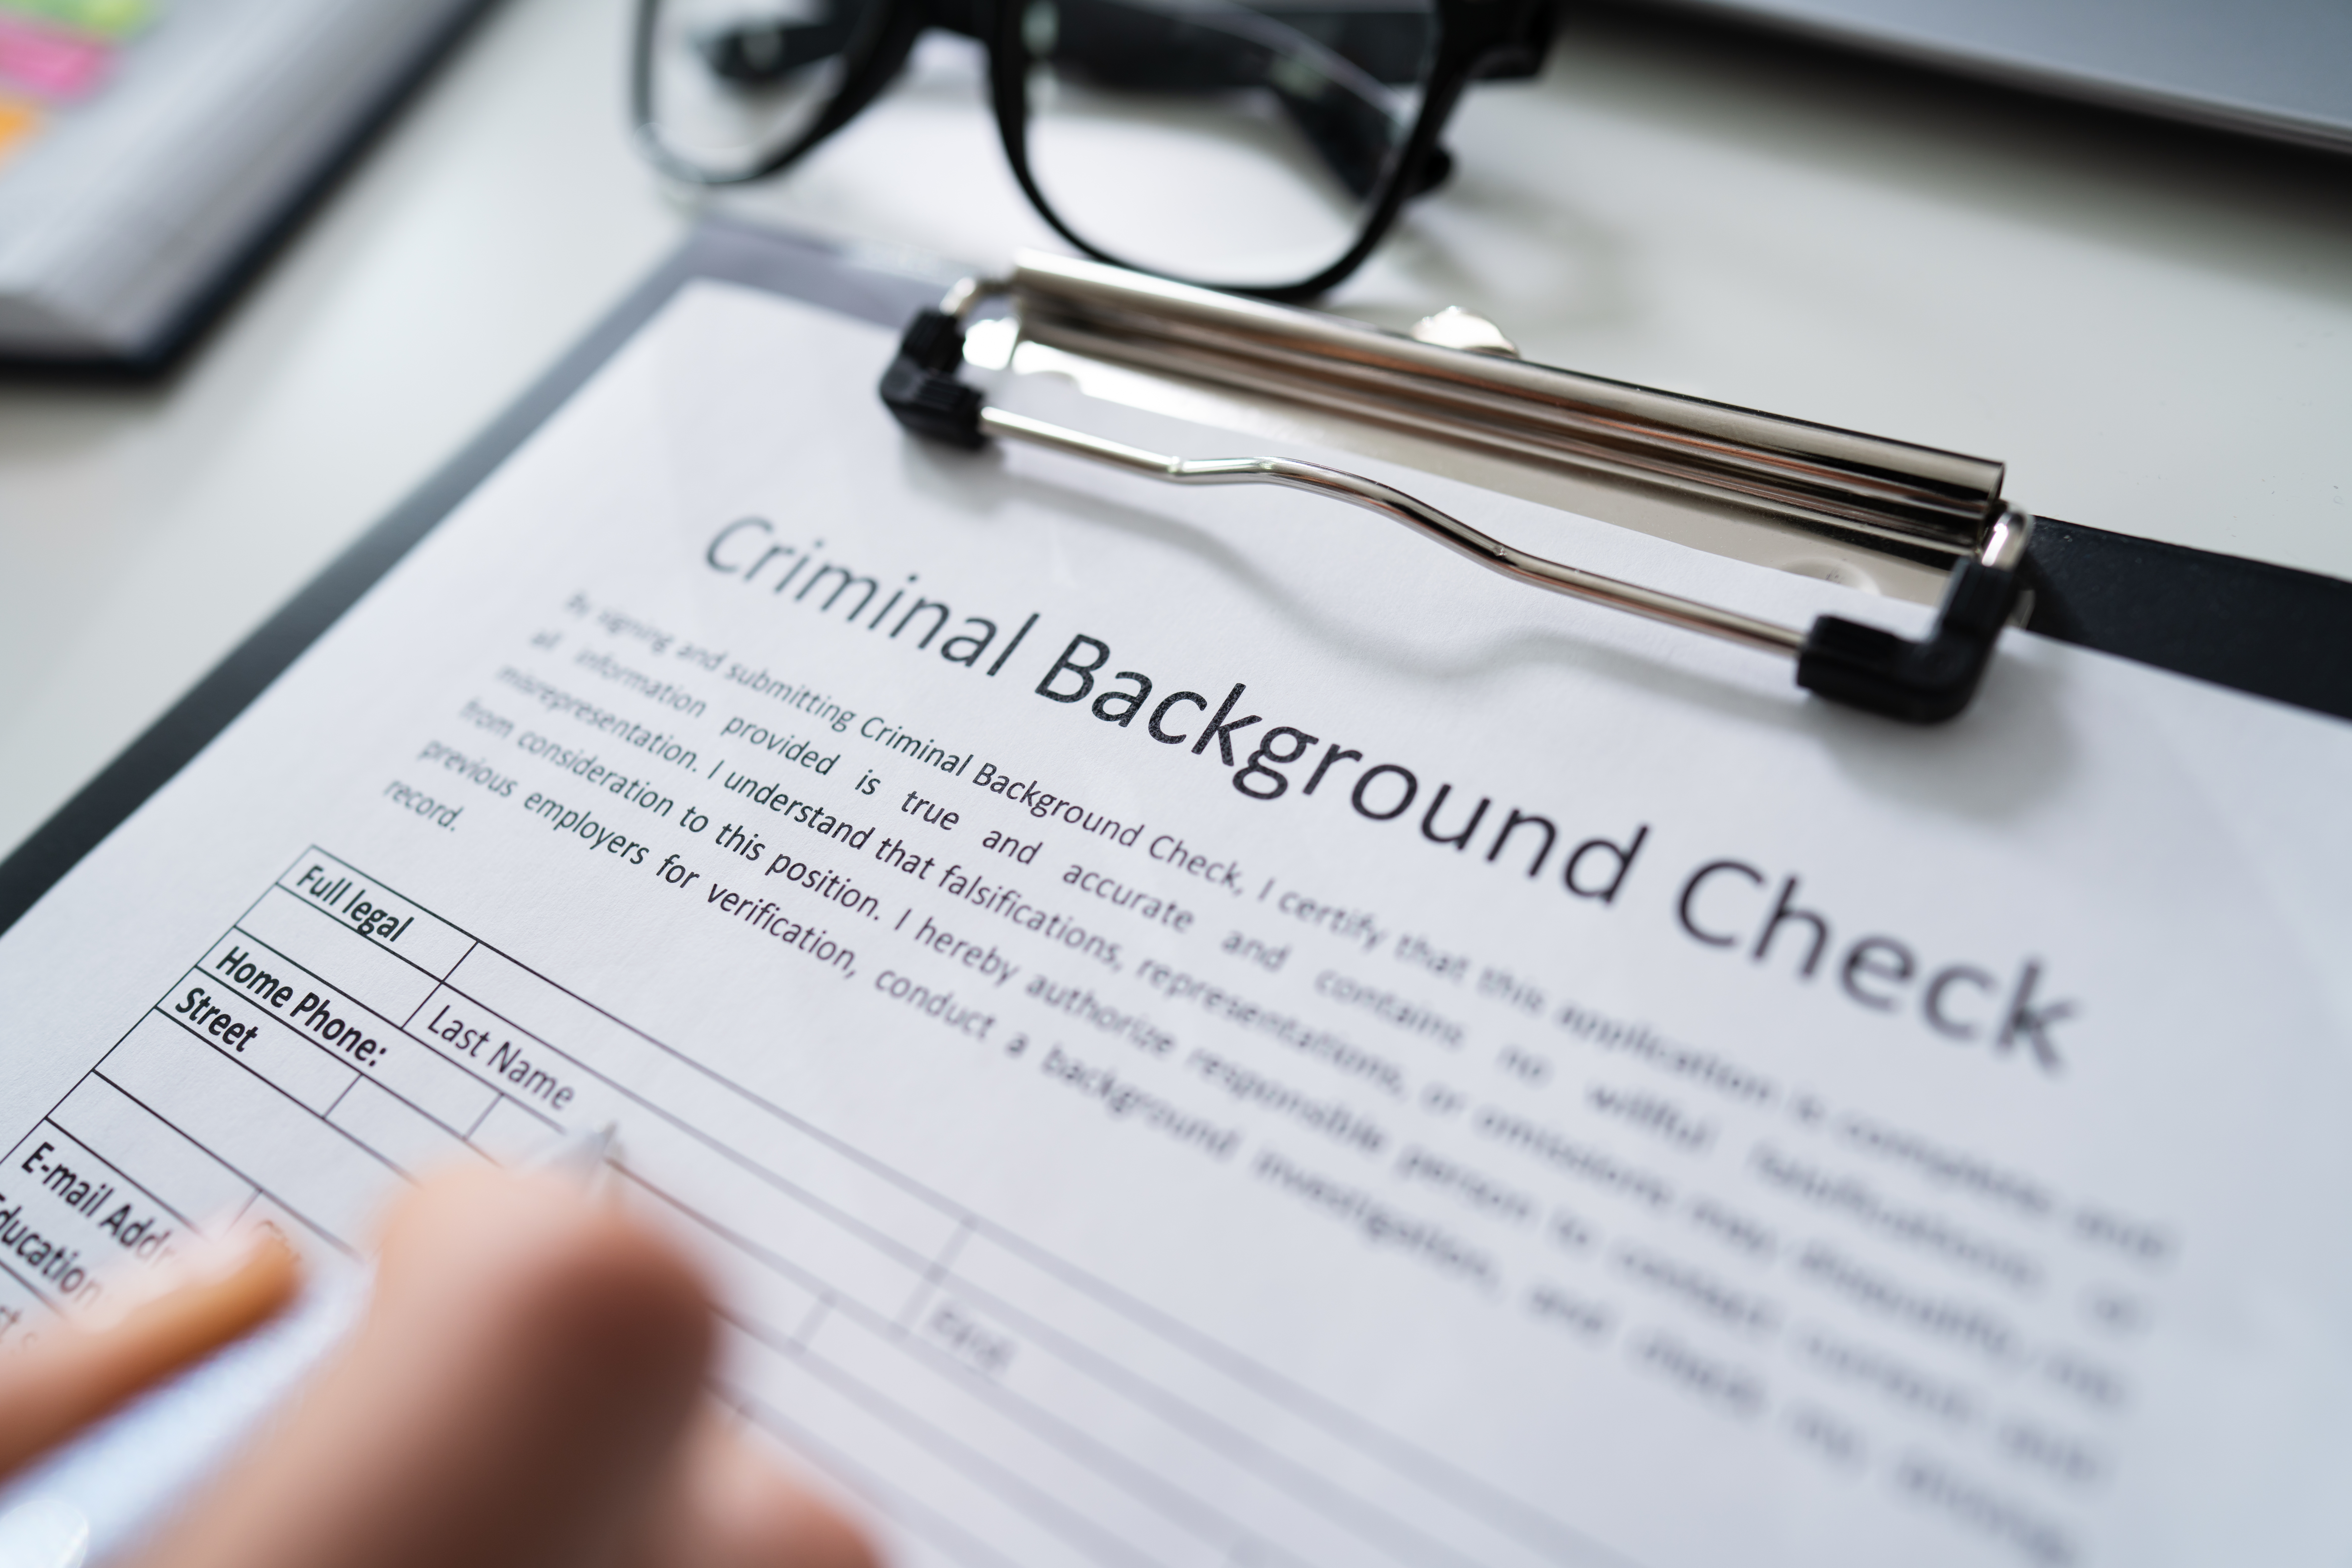 An image of the criminal background check paperwork on a clipboard